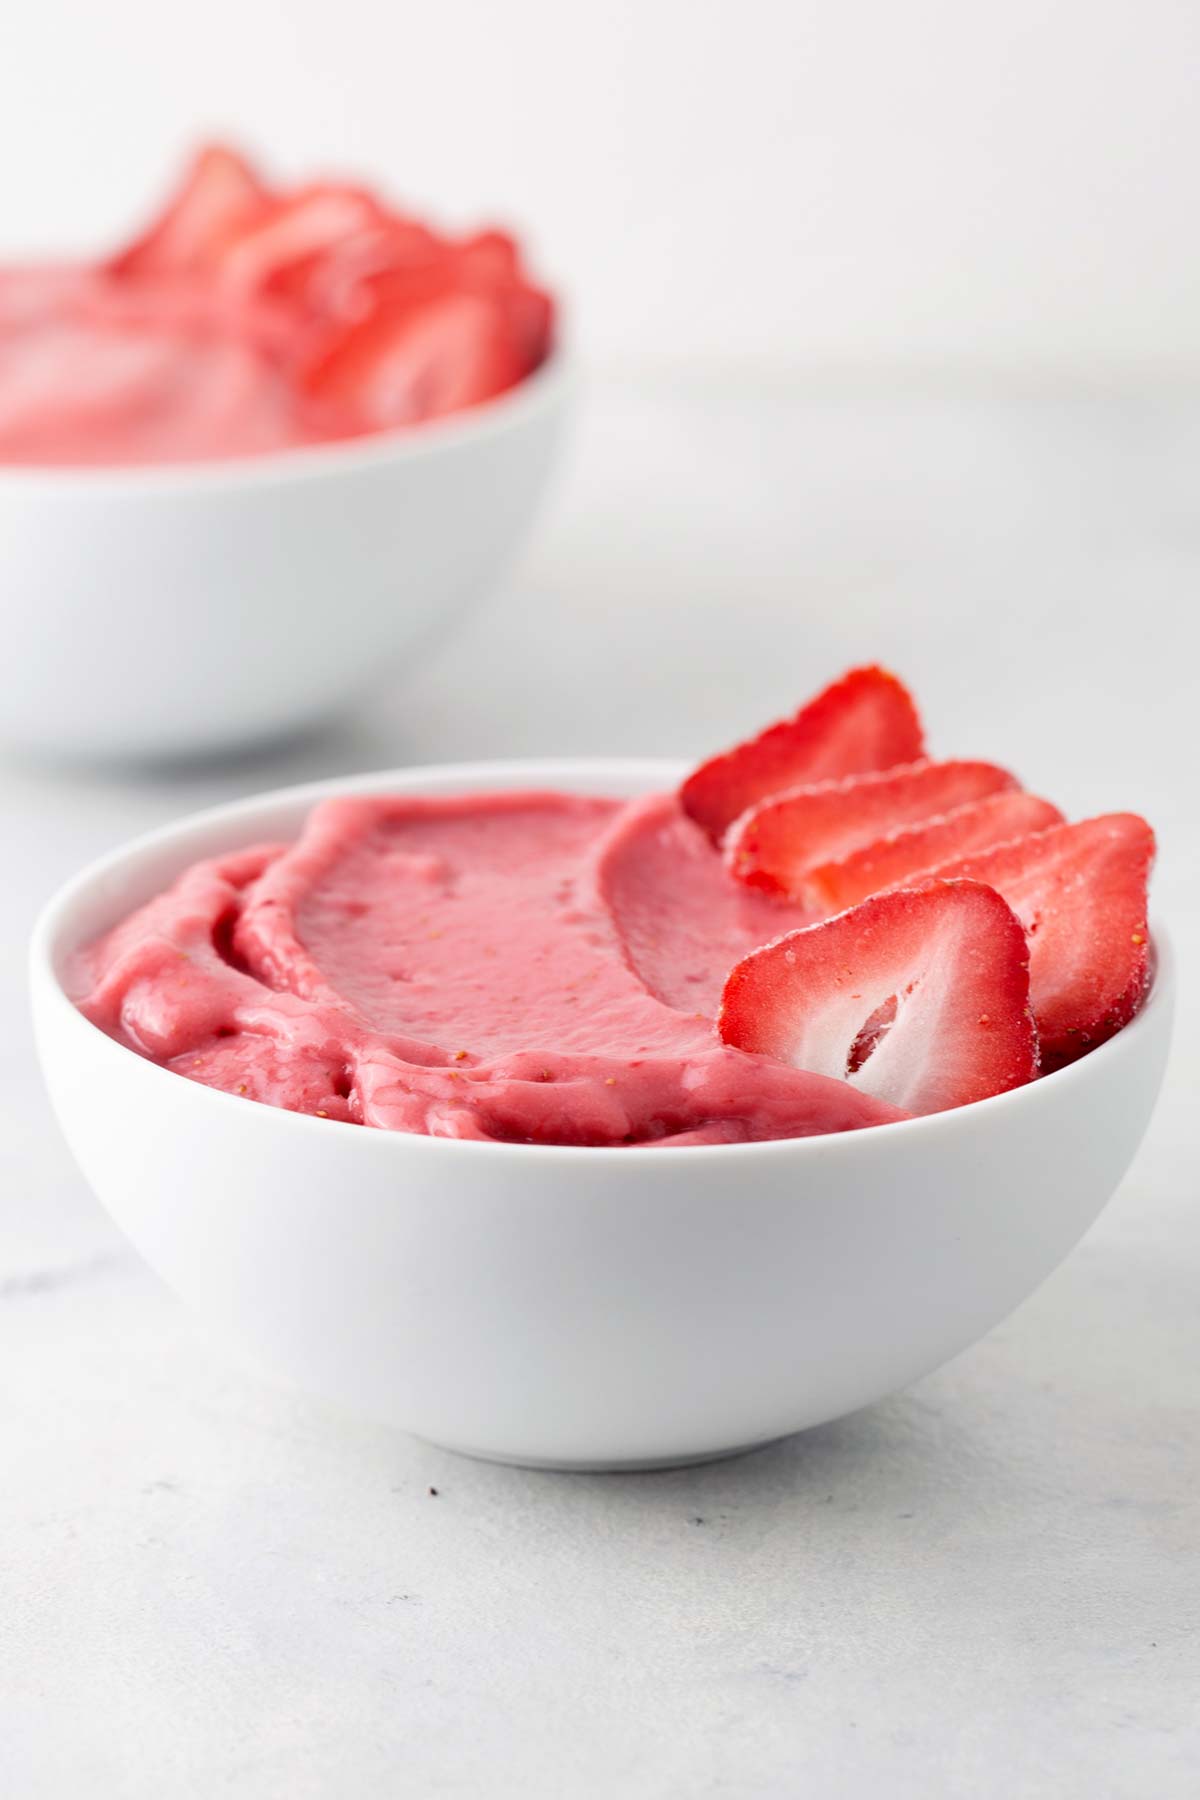 Strawberry smoothie bowl with sliced strawberries on top.